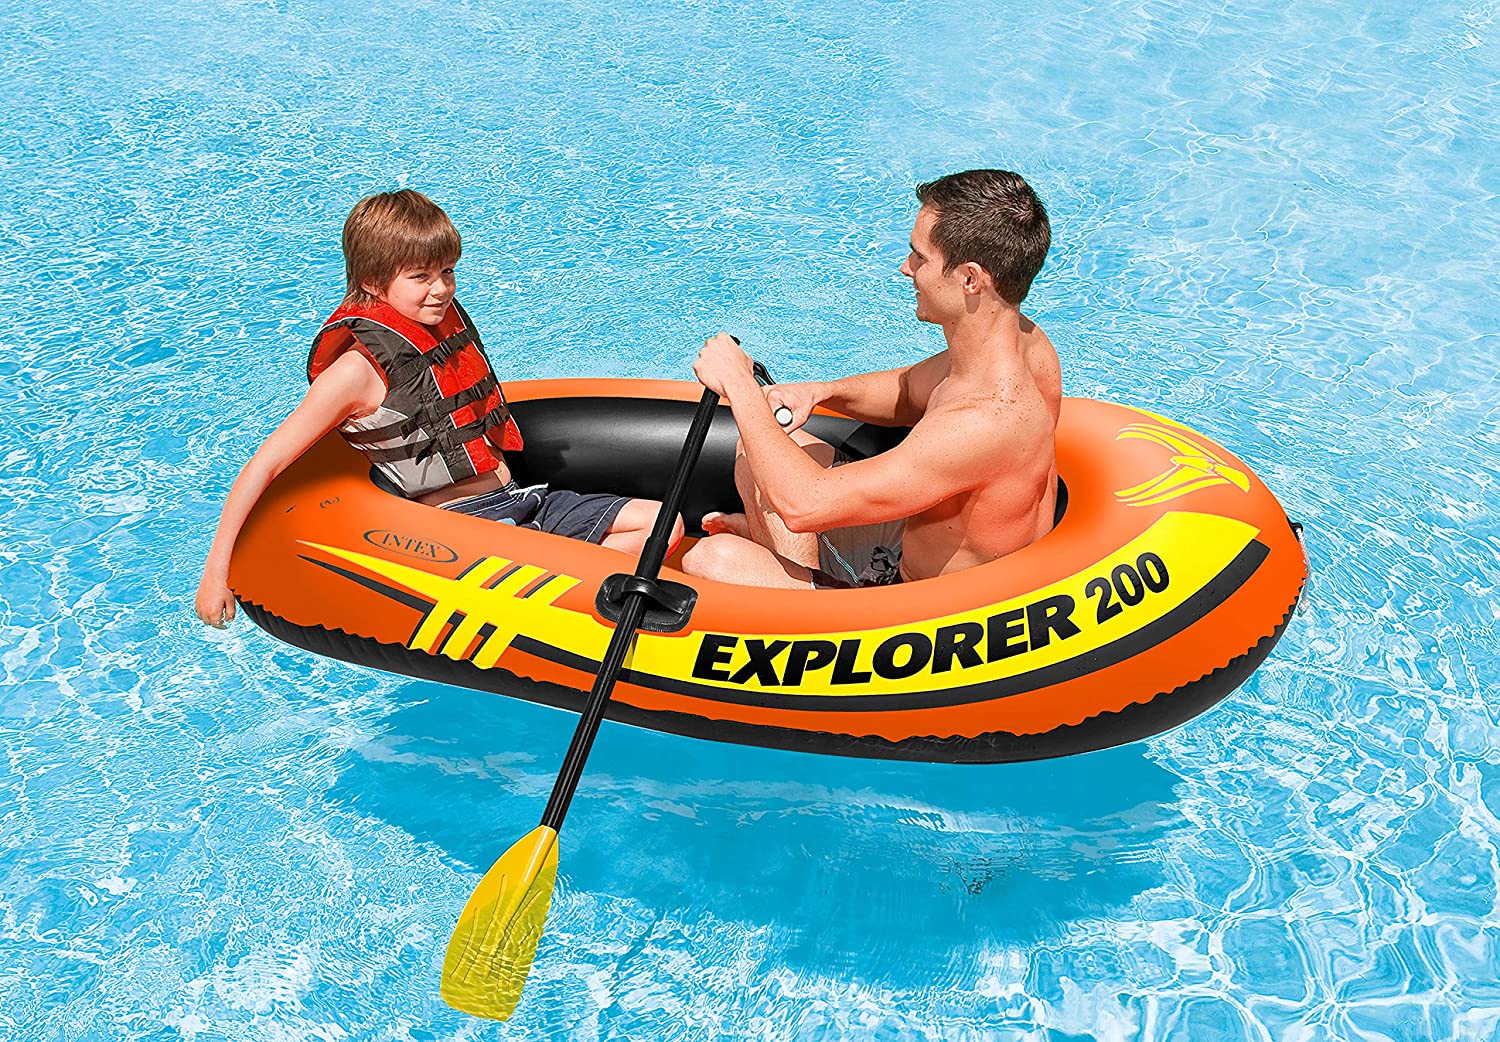 Intex Explorer Inflatable Boat River Float Swimming Pool Accessories Cup Holders 